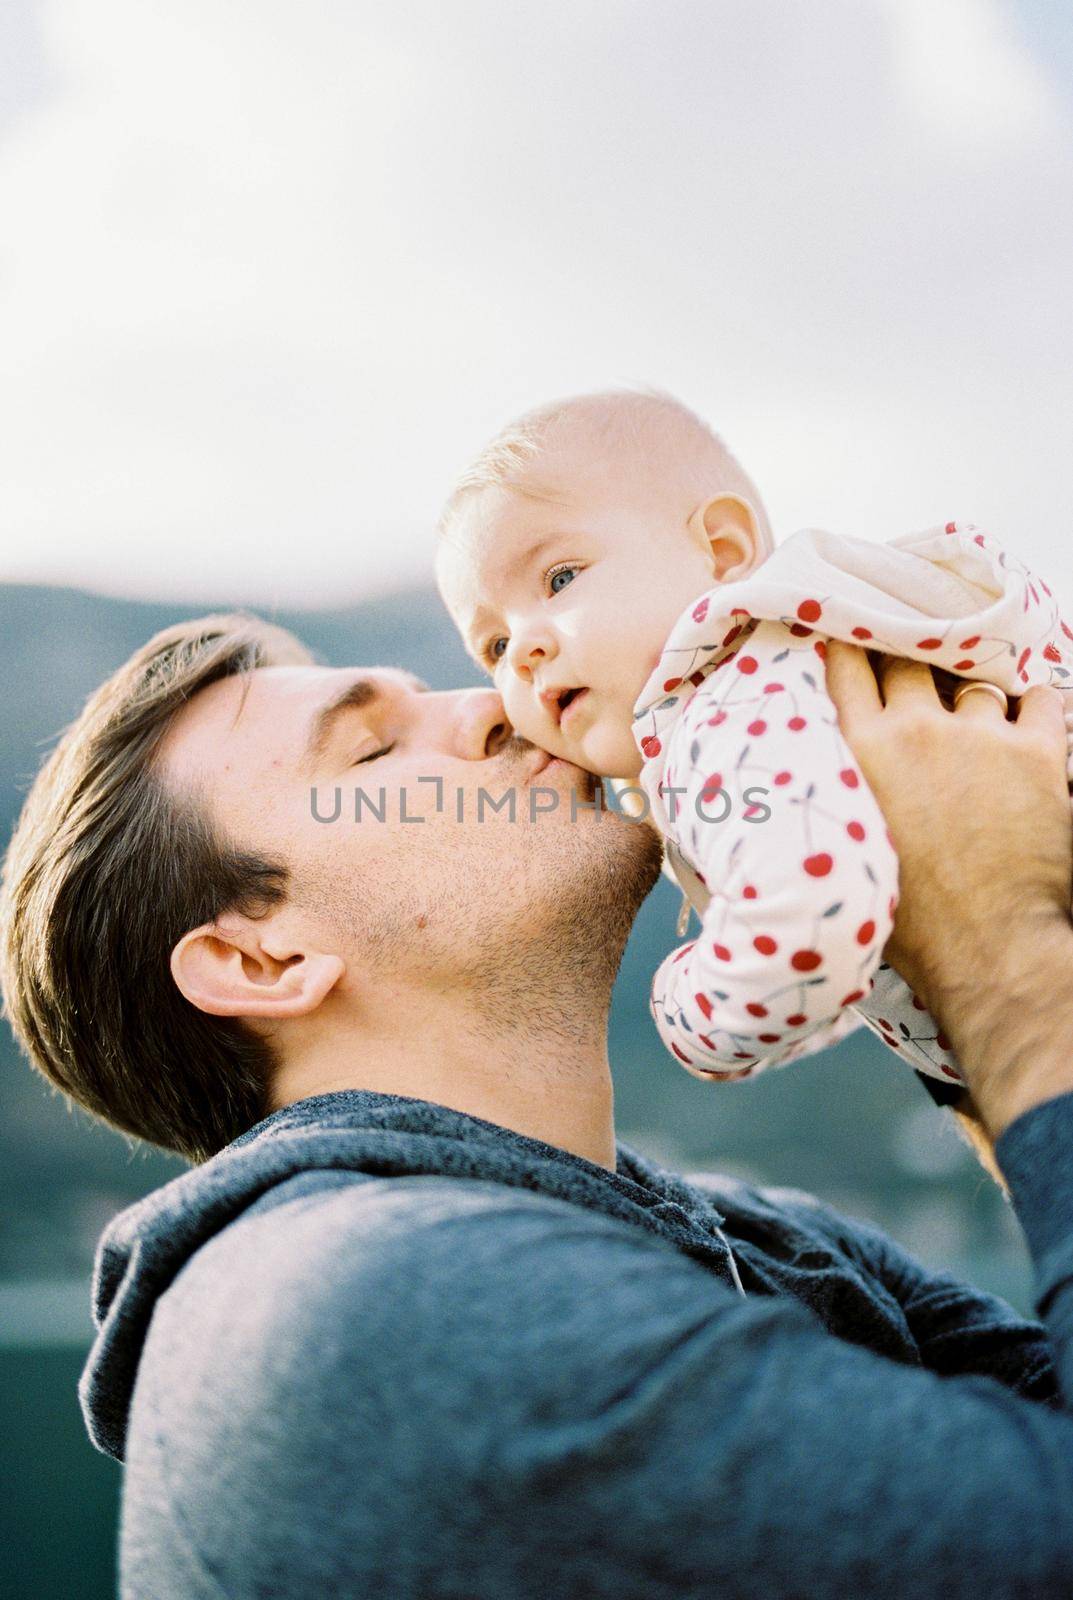 Dad lifts the baby above his head and kisses him on the cheek. Portrait. High quality photo